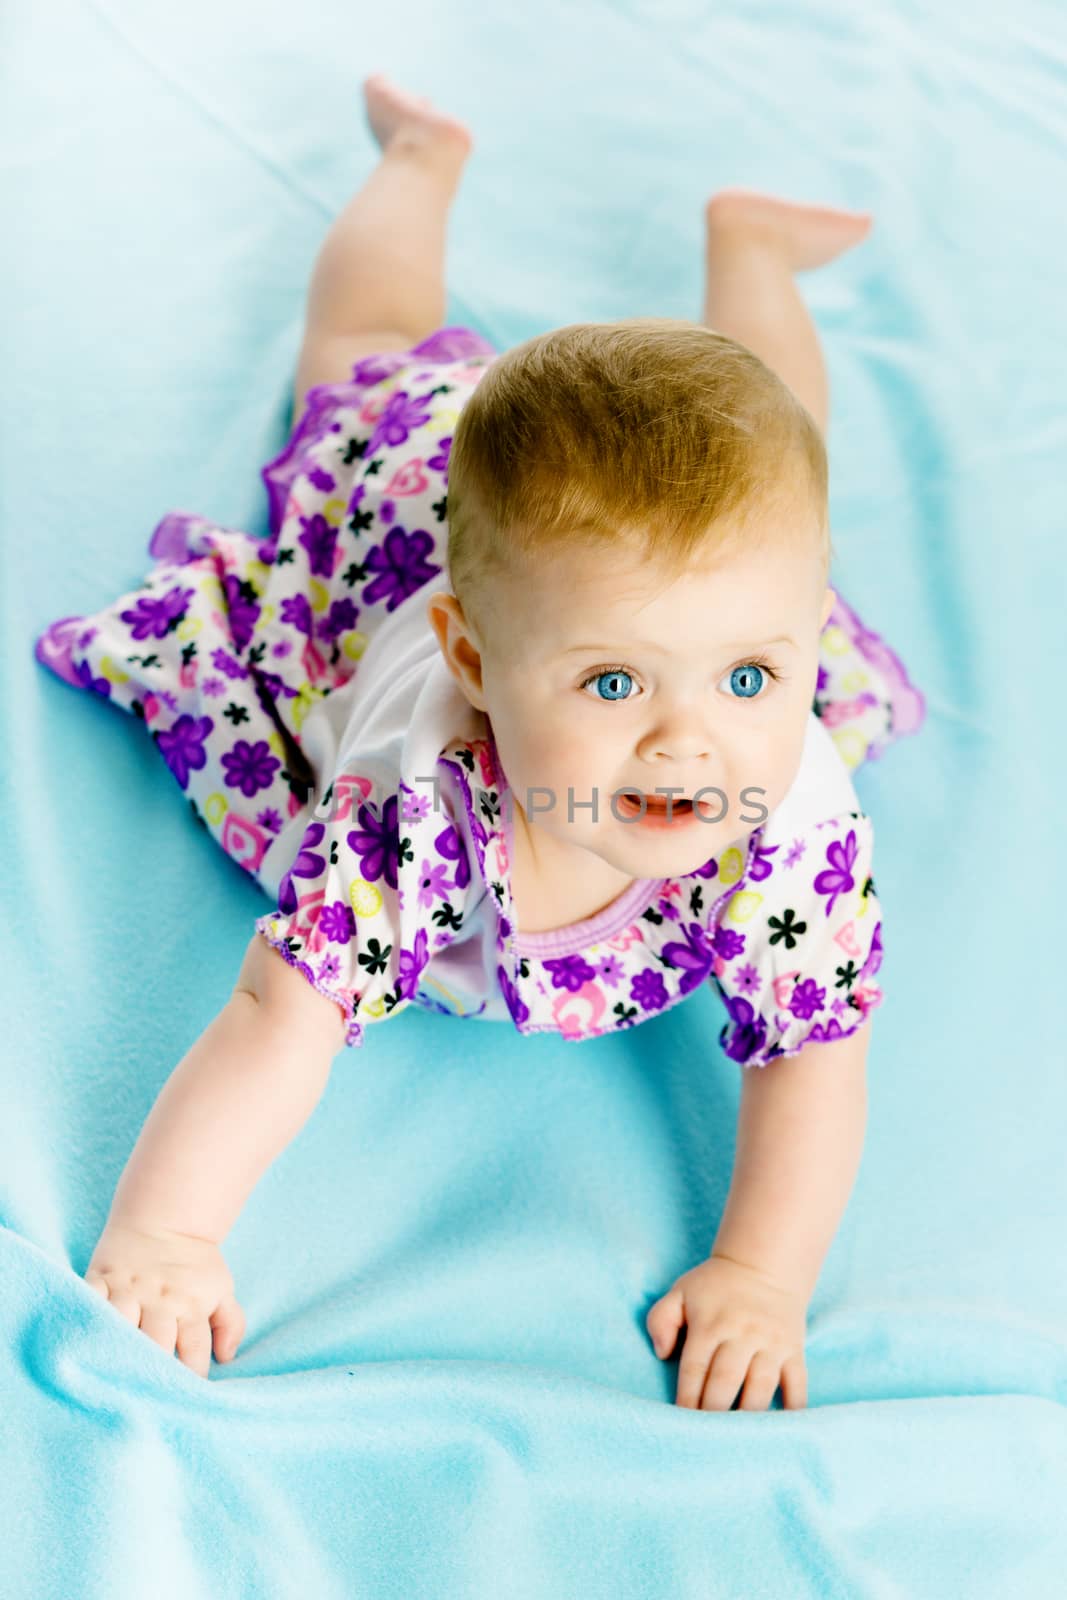 baby girl in a dress creeps on the blue coverlet by pzRomashka